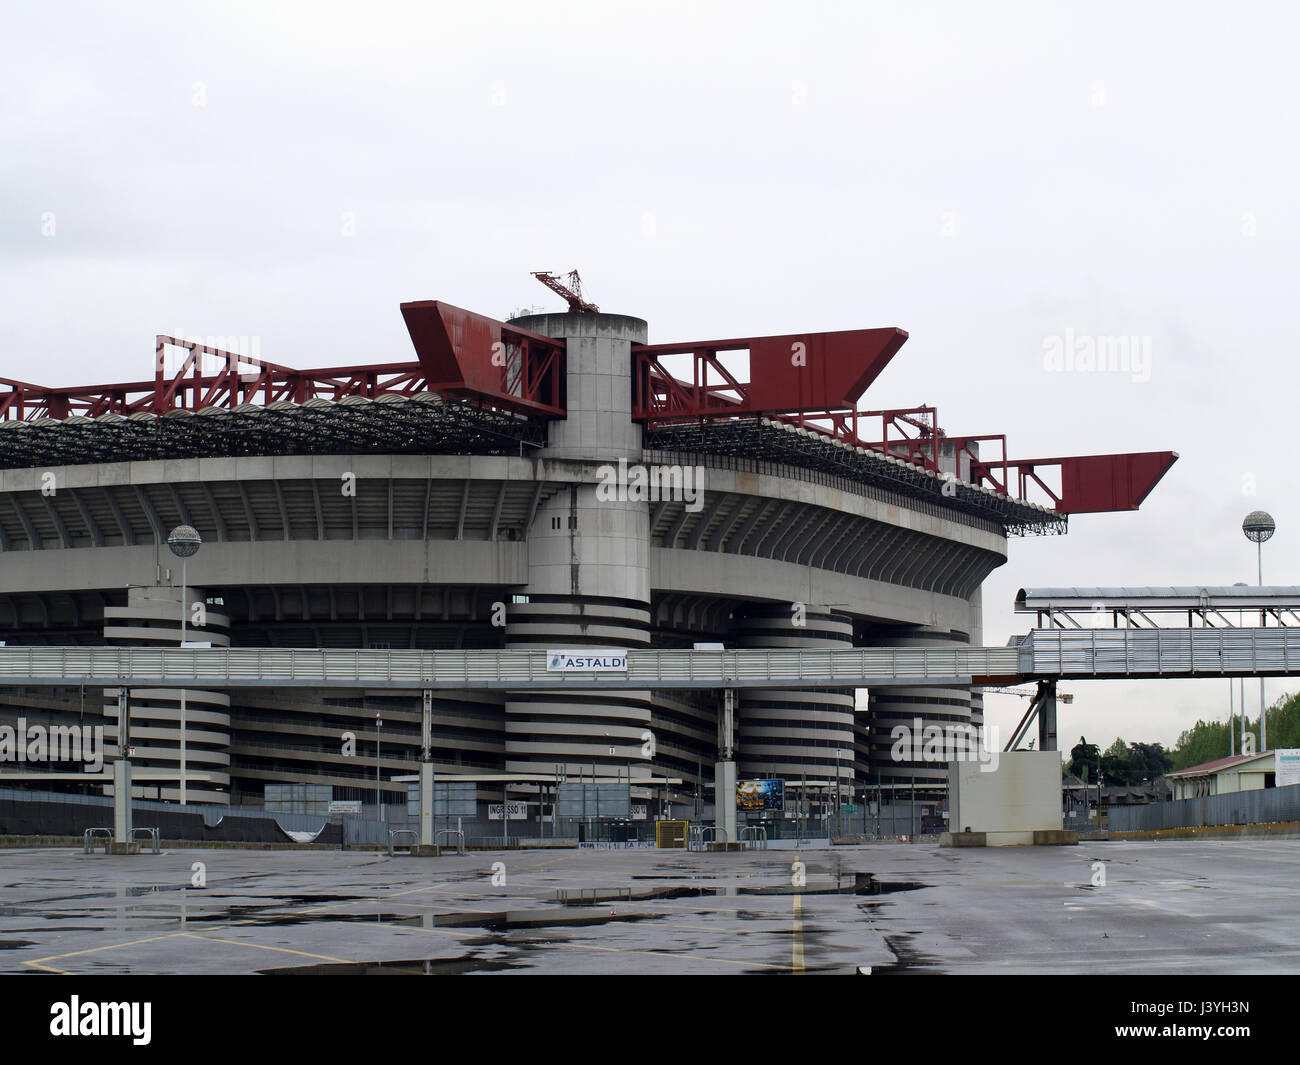 Giuseppe Meazza Stadium Stock Photos and Pictures - 9,592 Images